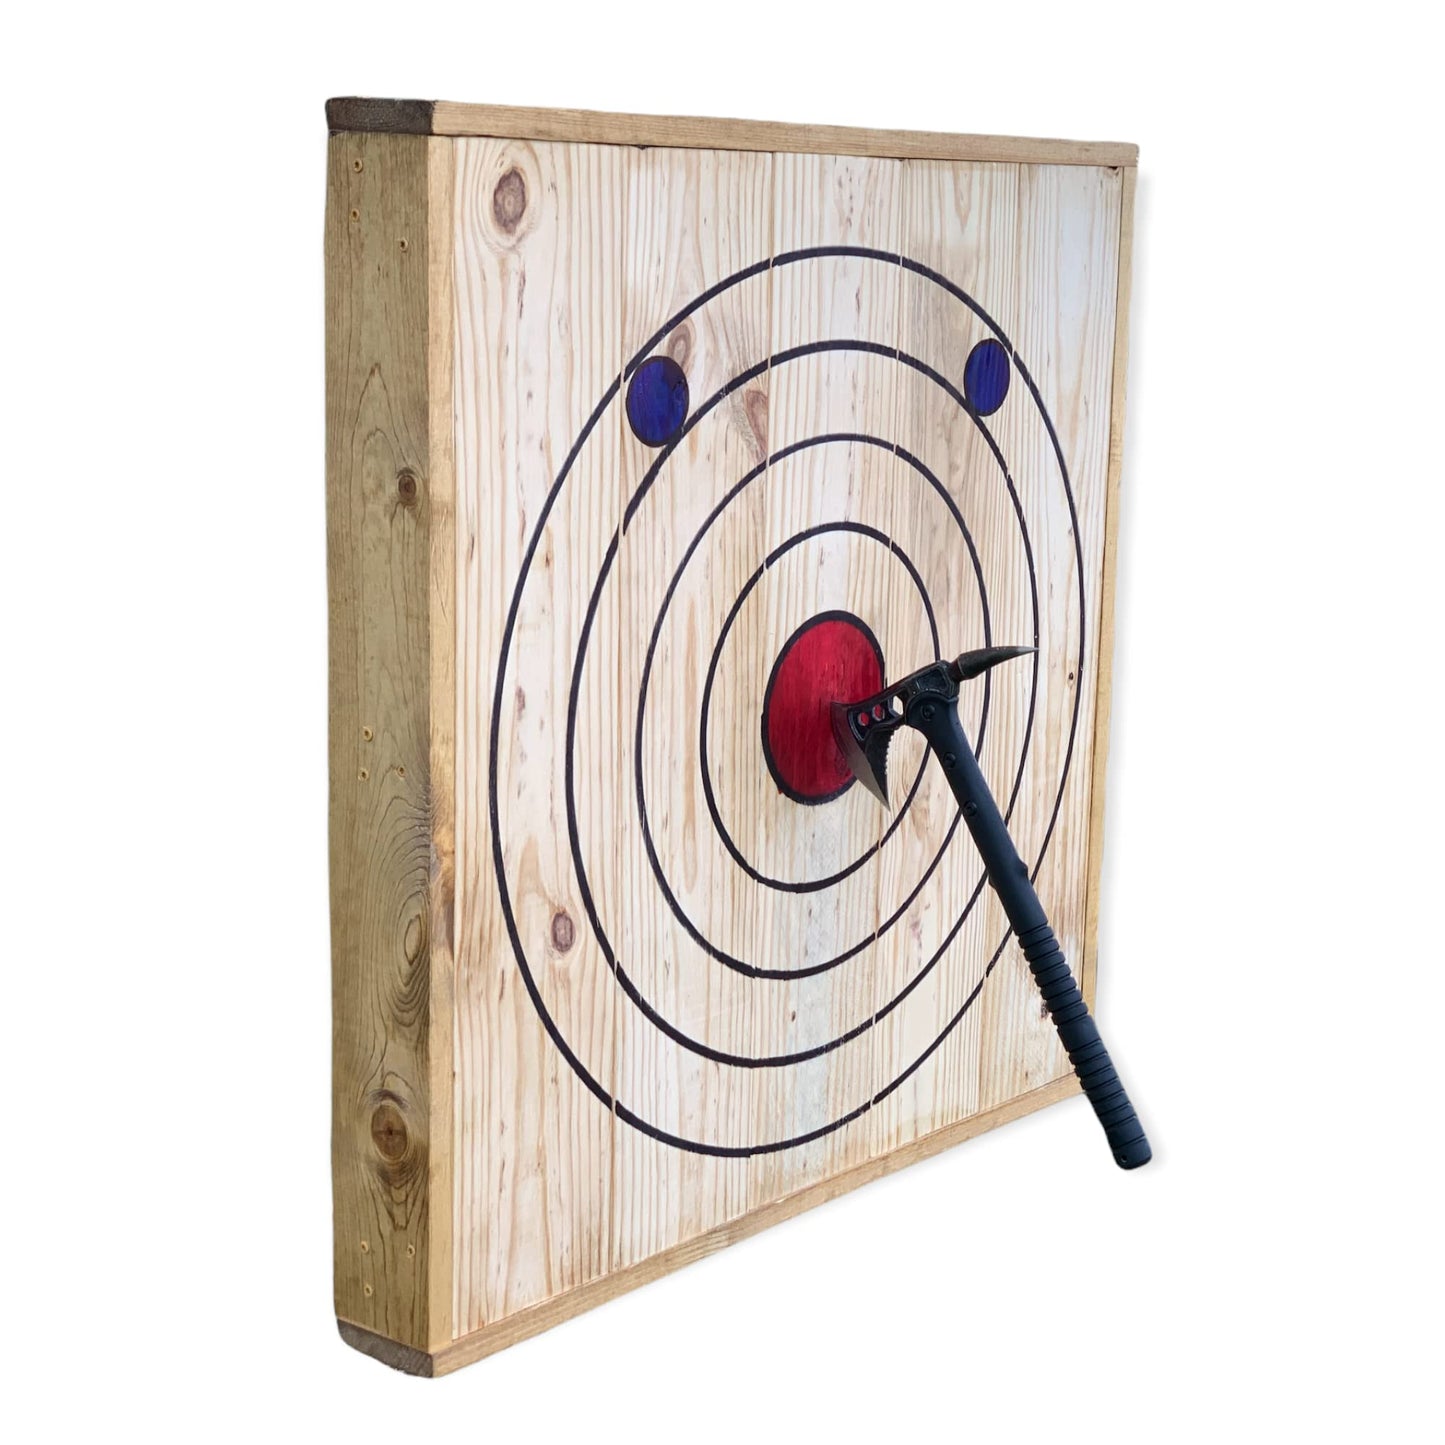 Medium 4-Ring Hanging Axe and Knife Throwing Targets